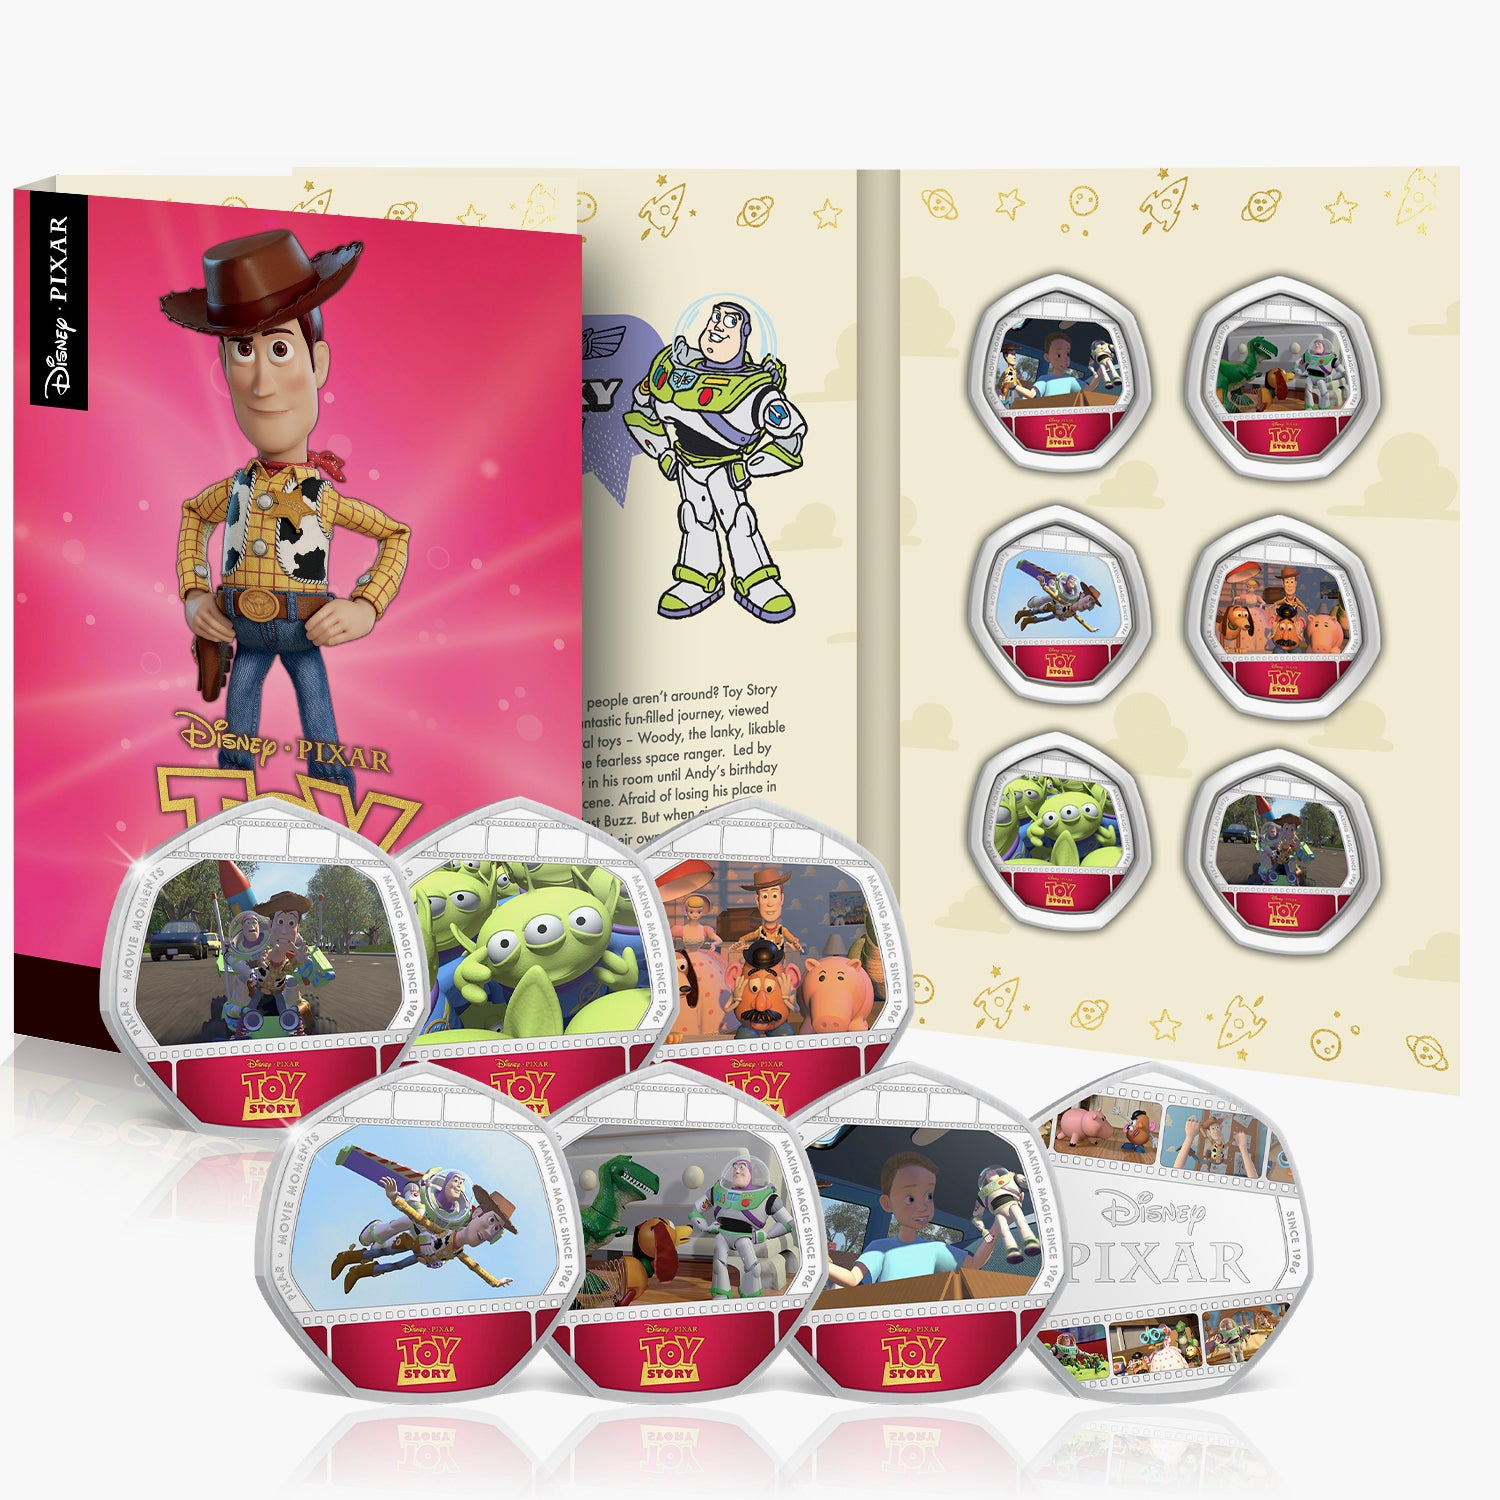 Pixar Movie Moments Toy Story